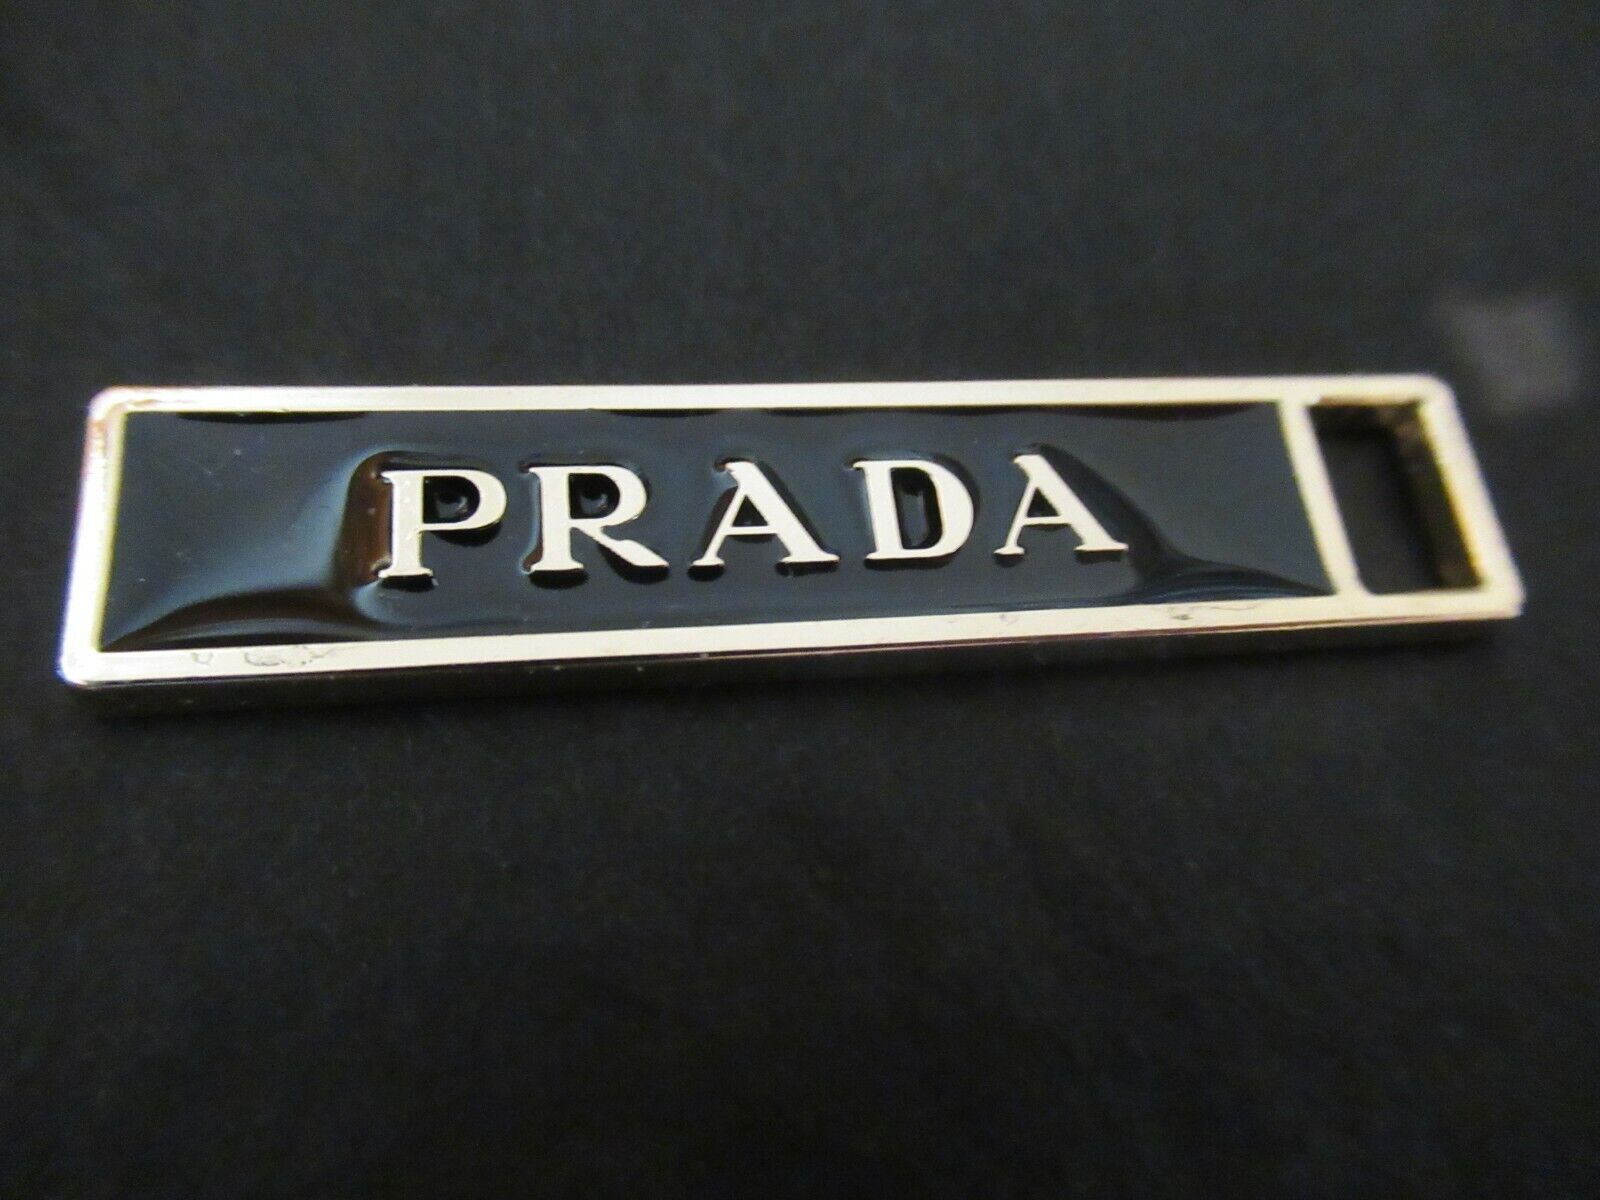 PRADA ZIP PULL   46mmx10mm gold tone BLACK ,   THIS IS FOR 1